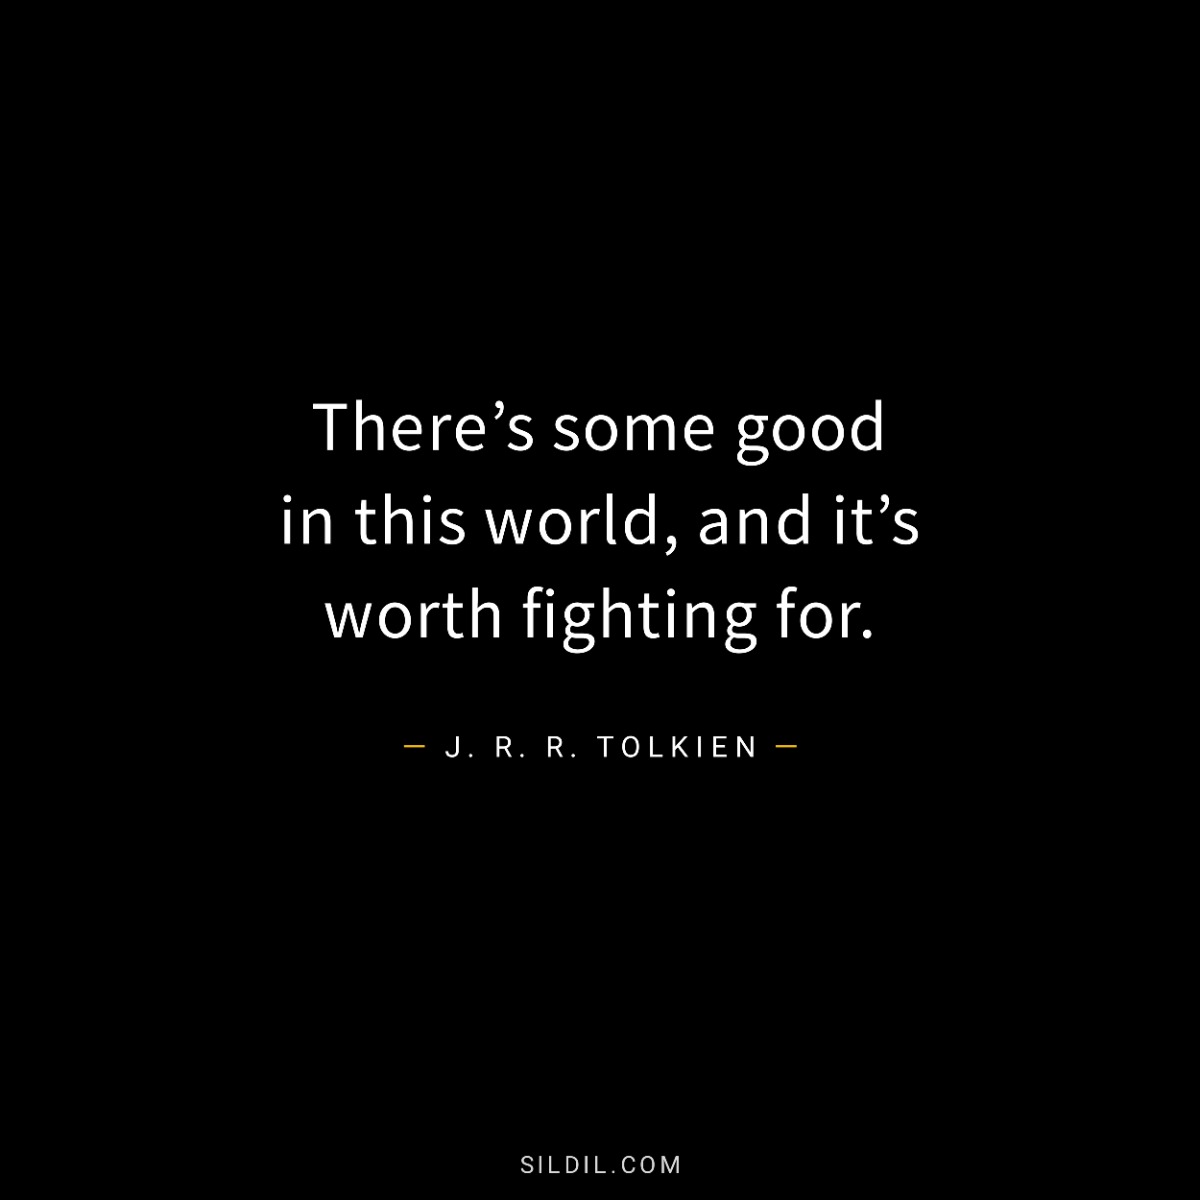 There’s some good in this world, and it’s worth fighting for.